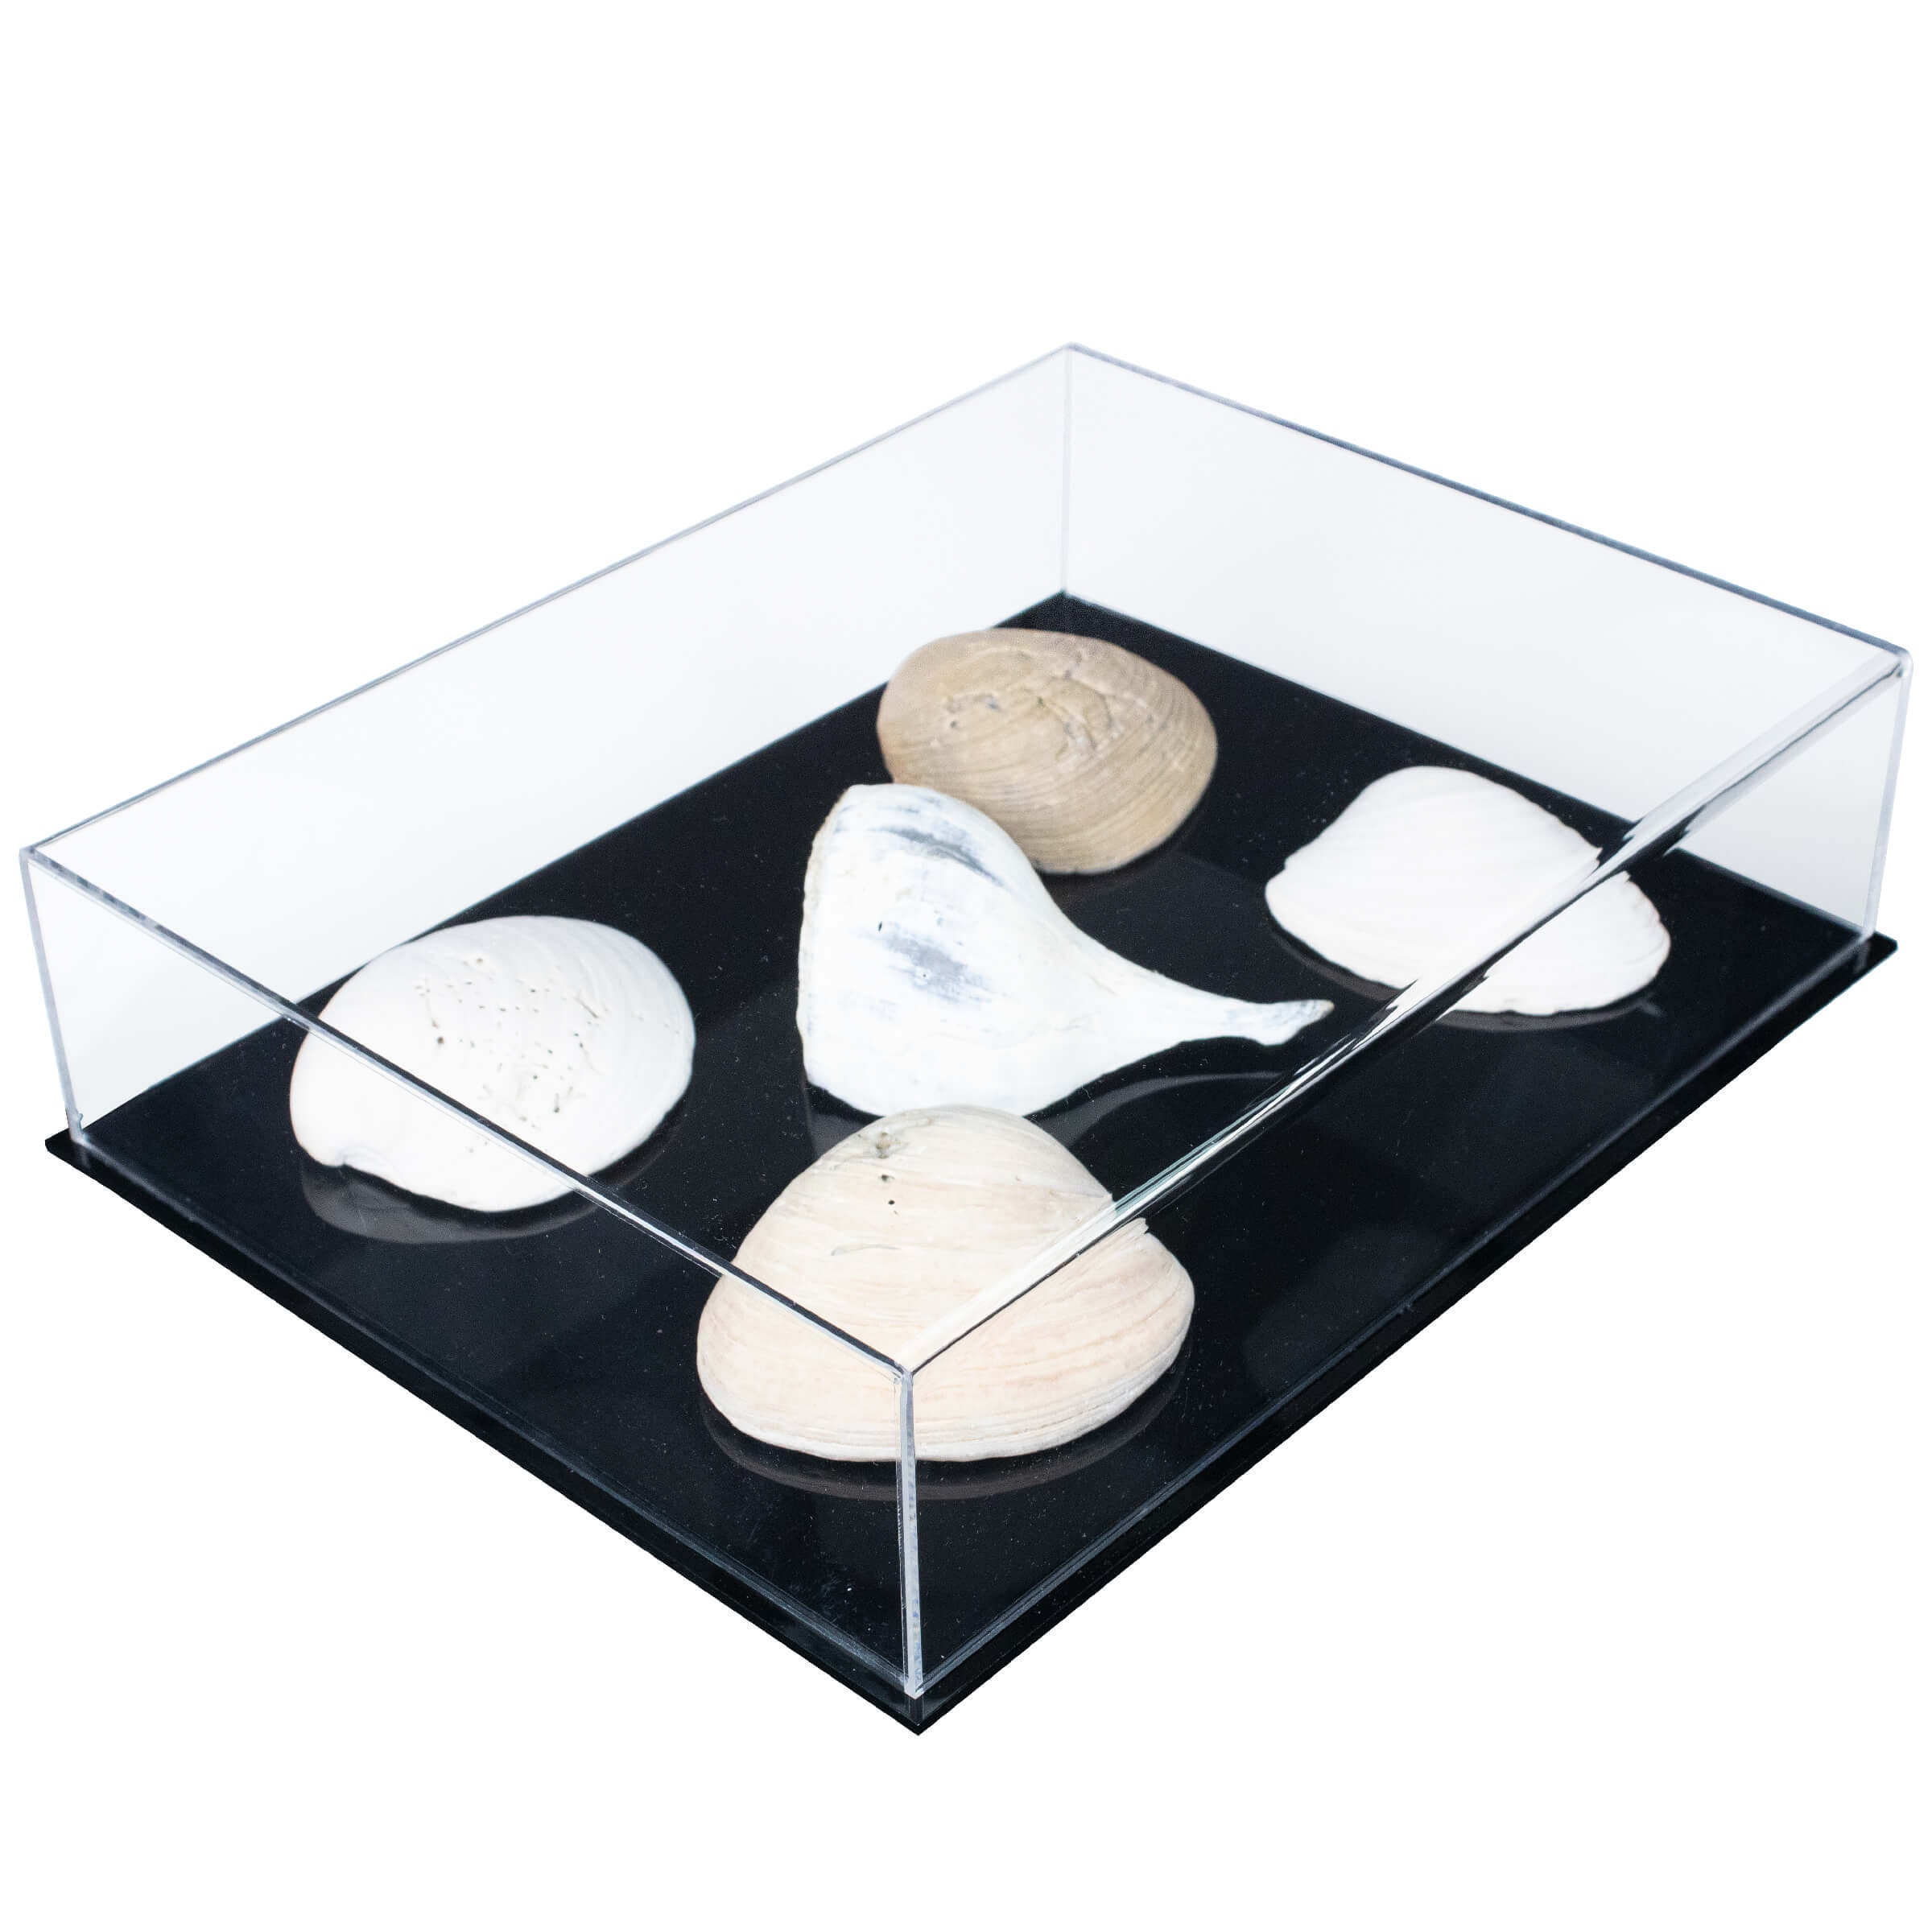 Better Display Cases Acrylic Book Display Case 15.25 x 12 x 9 with  Mirror and Black Base (A025)